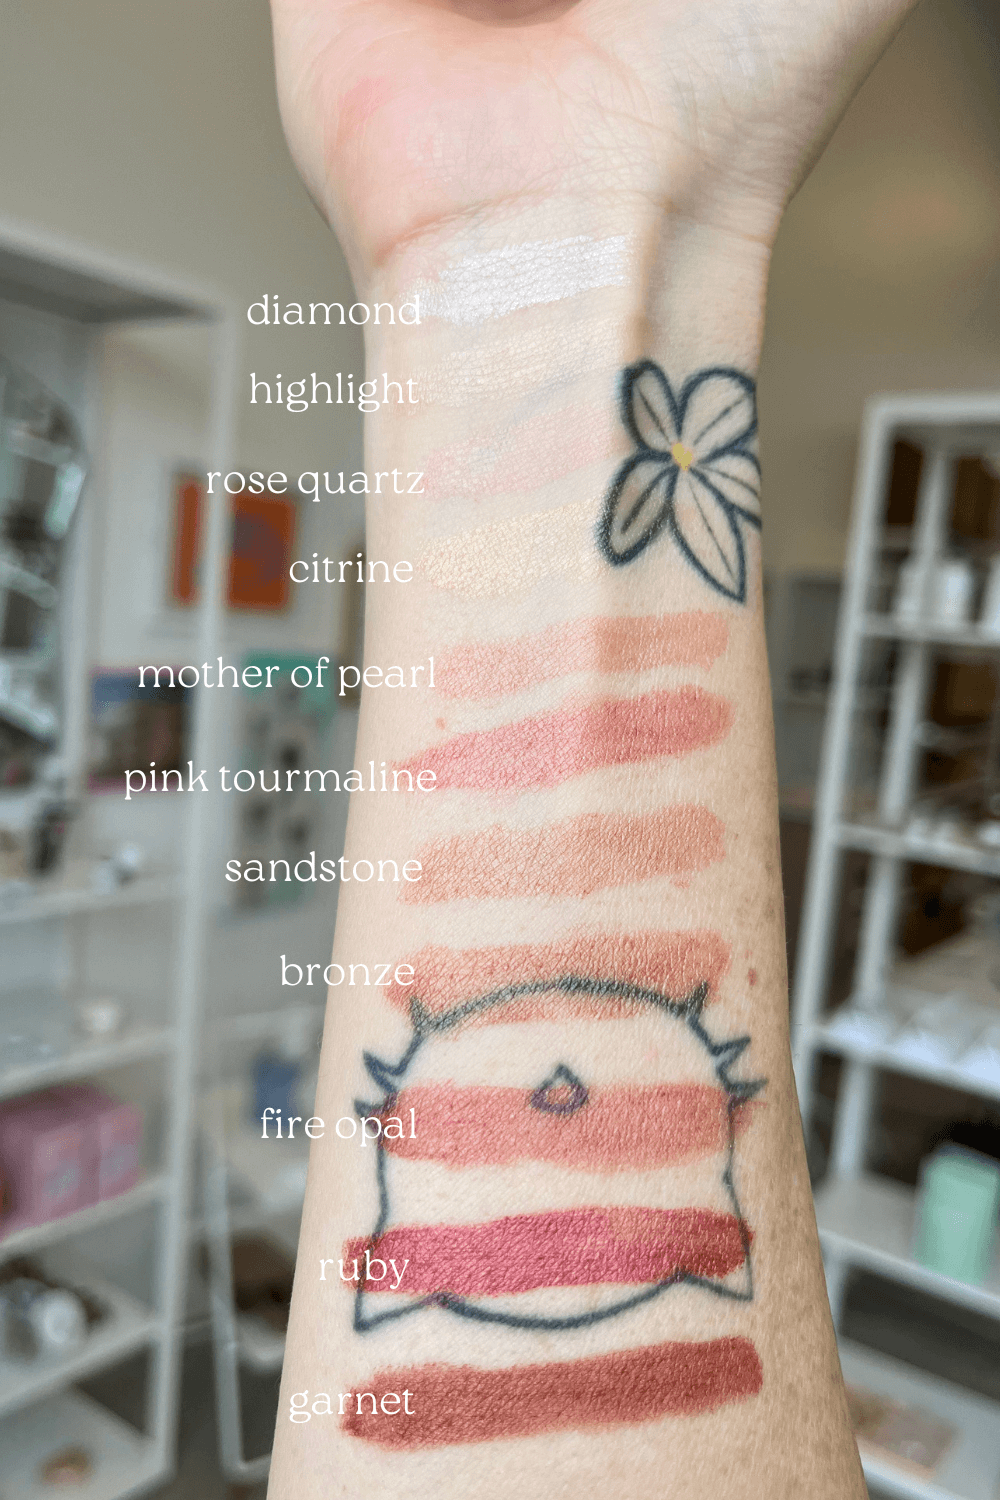 twinkle apothecary shimmer balm swatches